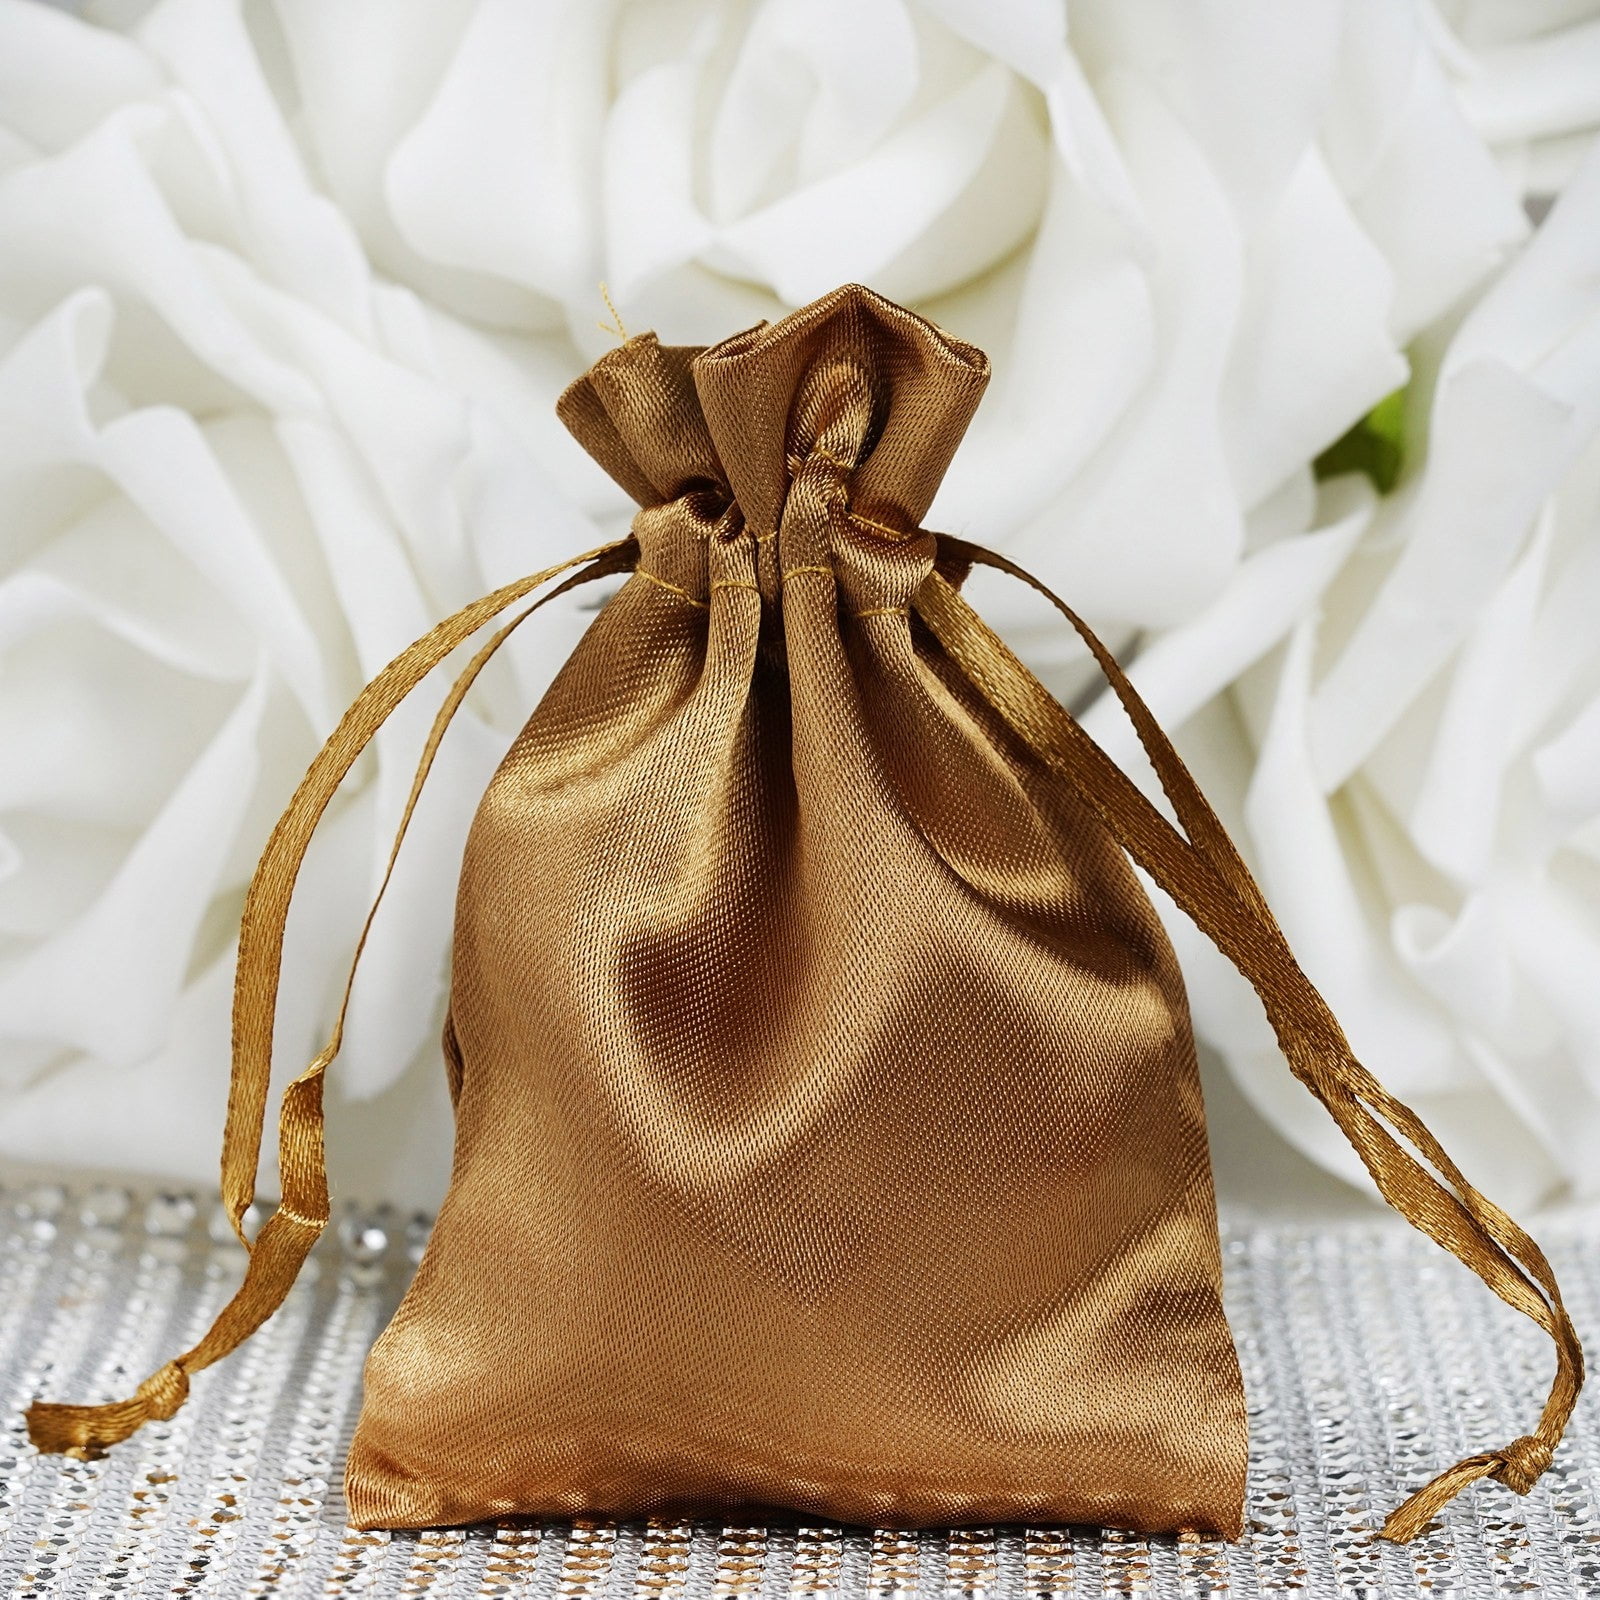 Chocolate Brown & Gold Silk Jewellery Pouch With Satin Lining And